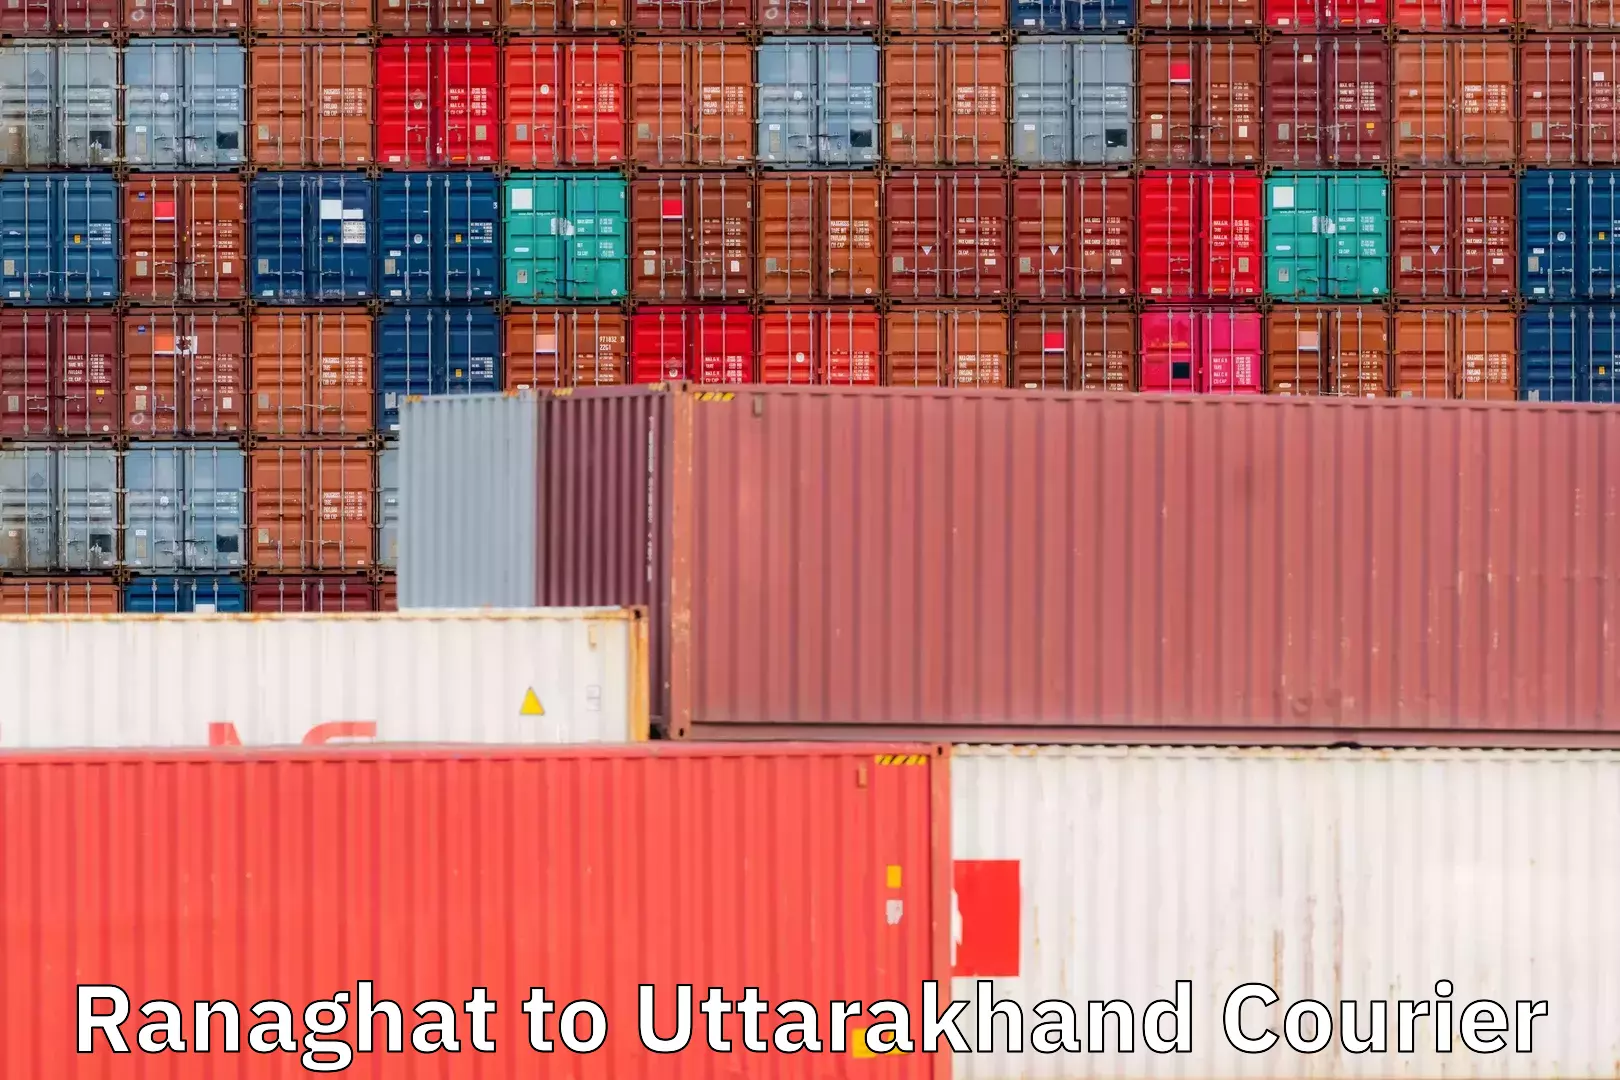 Flexible delivery scheduling Ranaghat to Uttarakhand